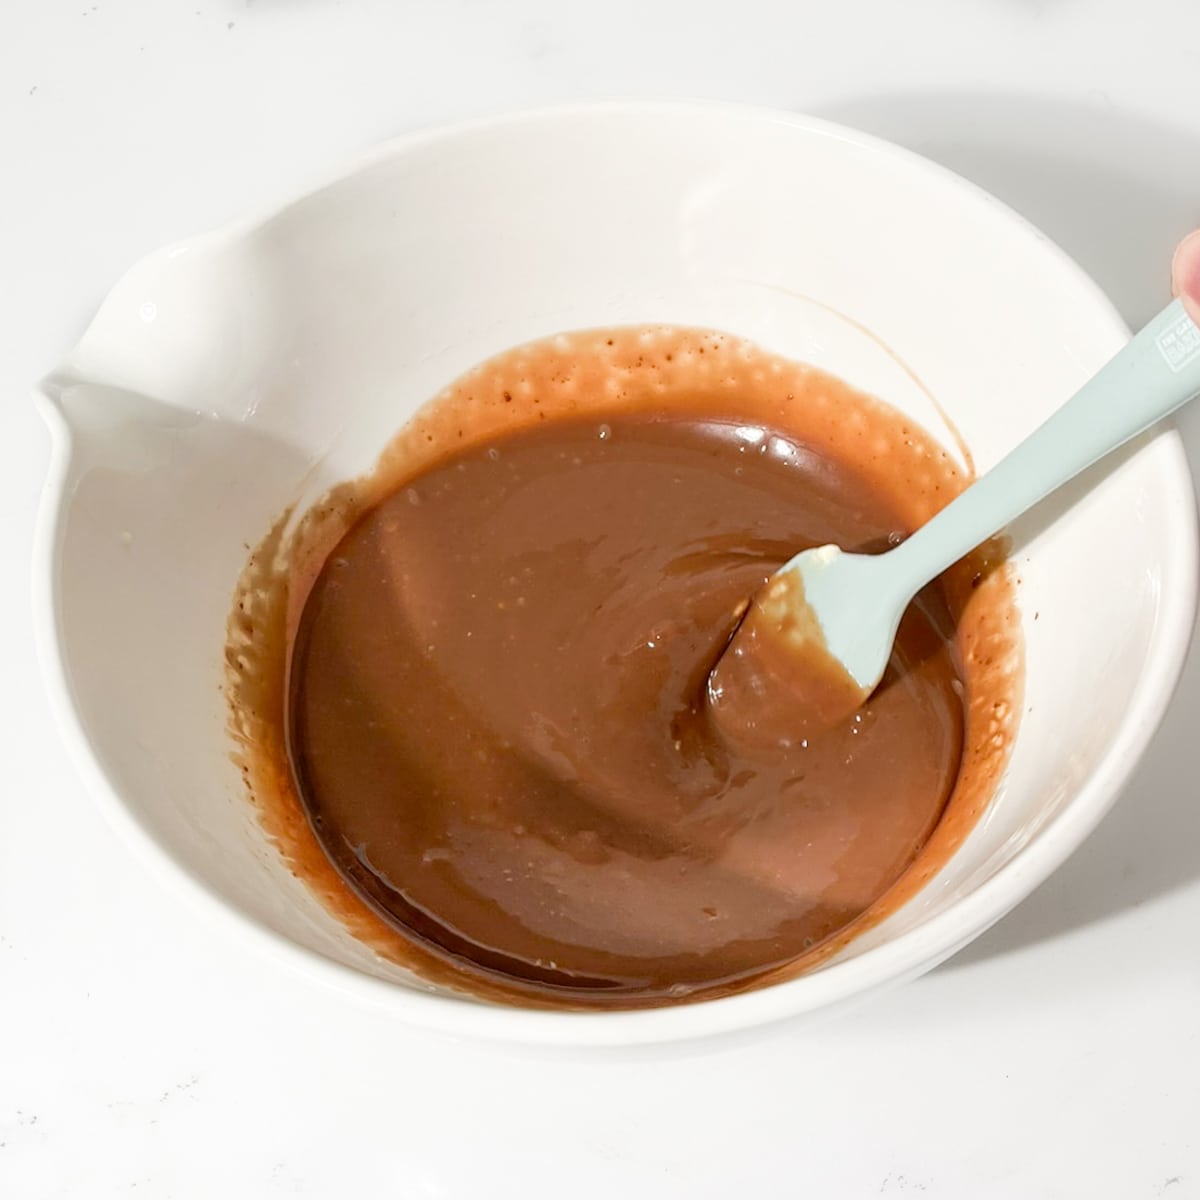 Stirring the cream and the chocolate together in a large white bowl.